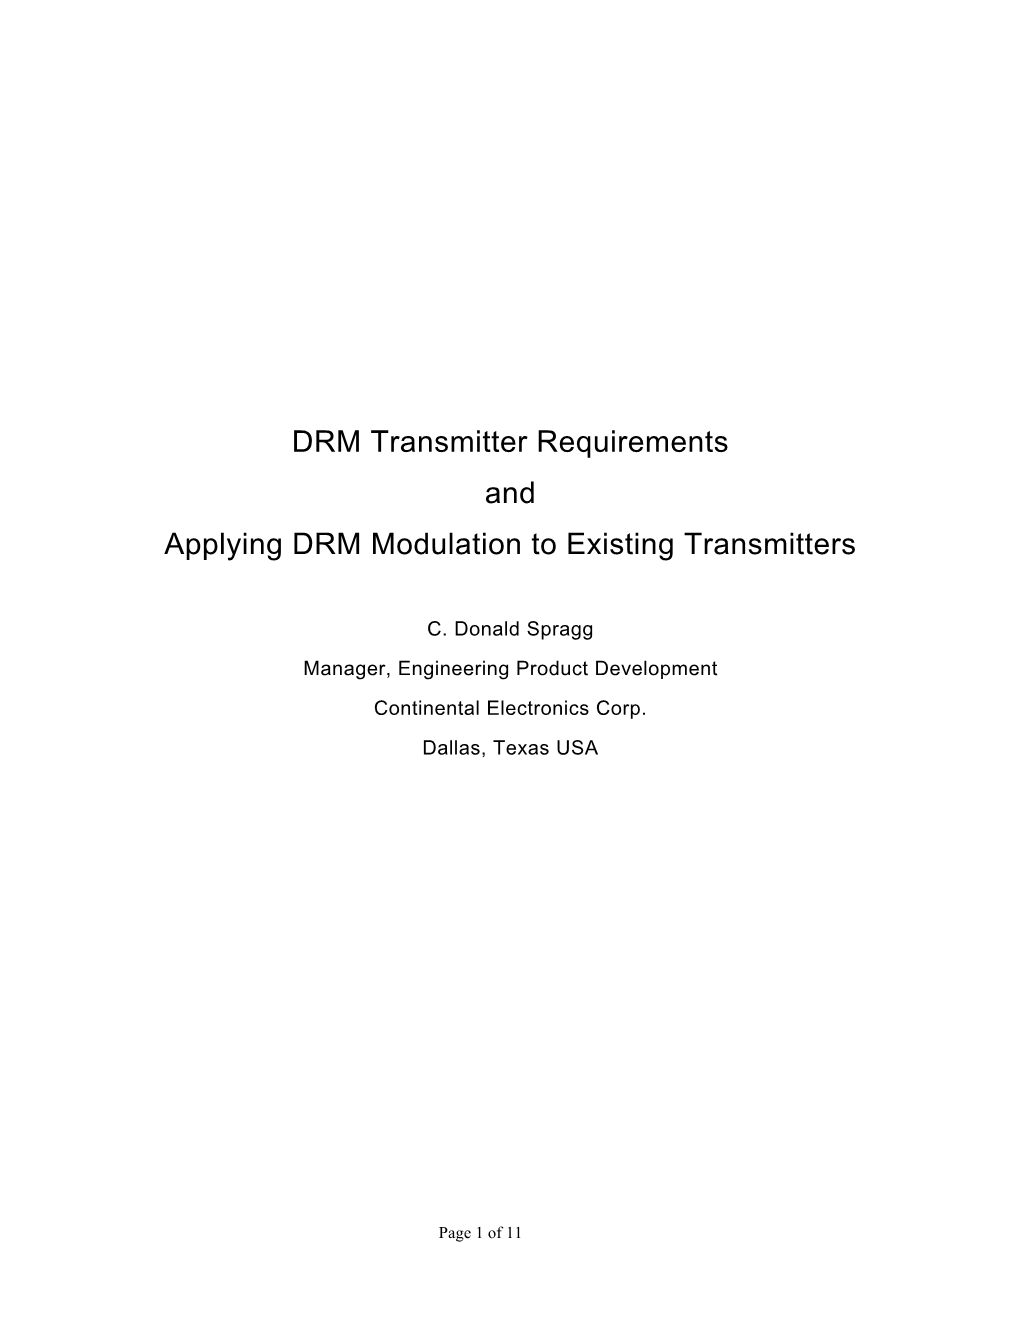 DRM Transmitter Requirements and Applying DRM Modulation to Existing Transmitters